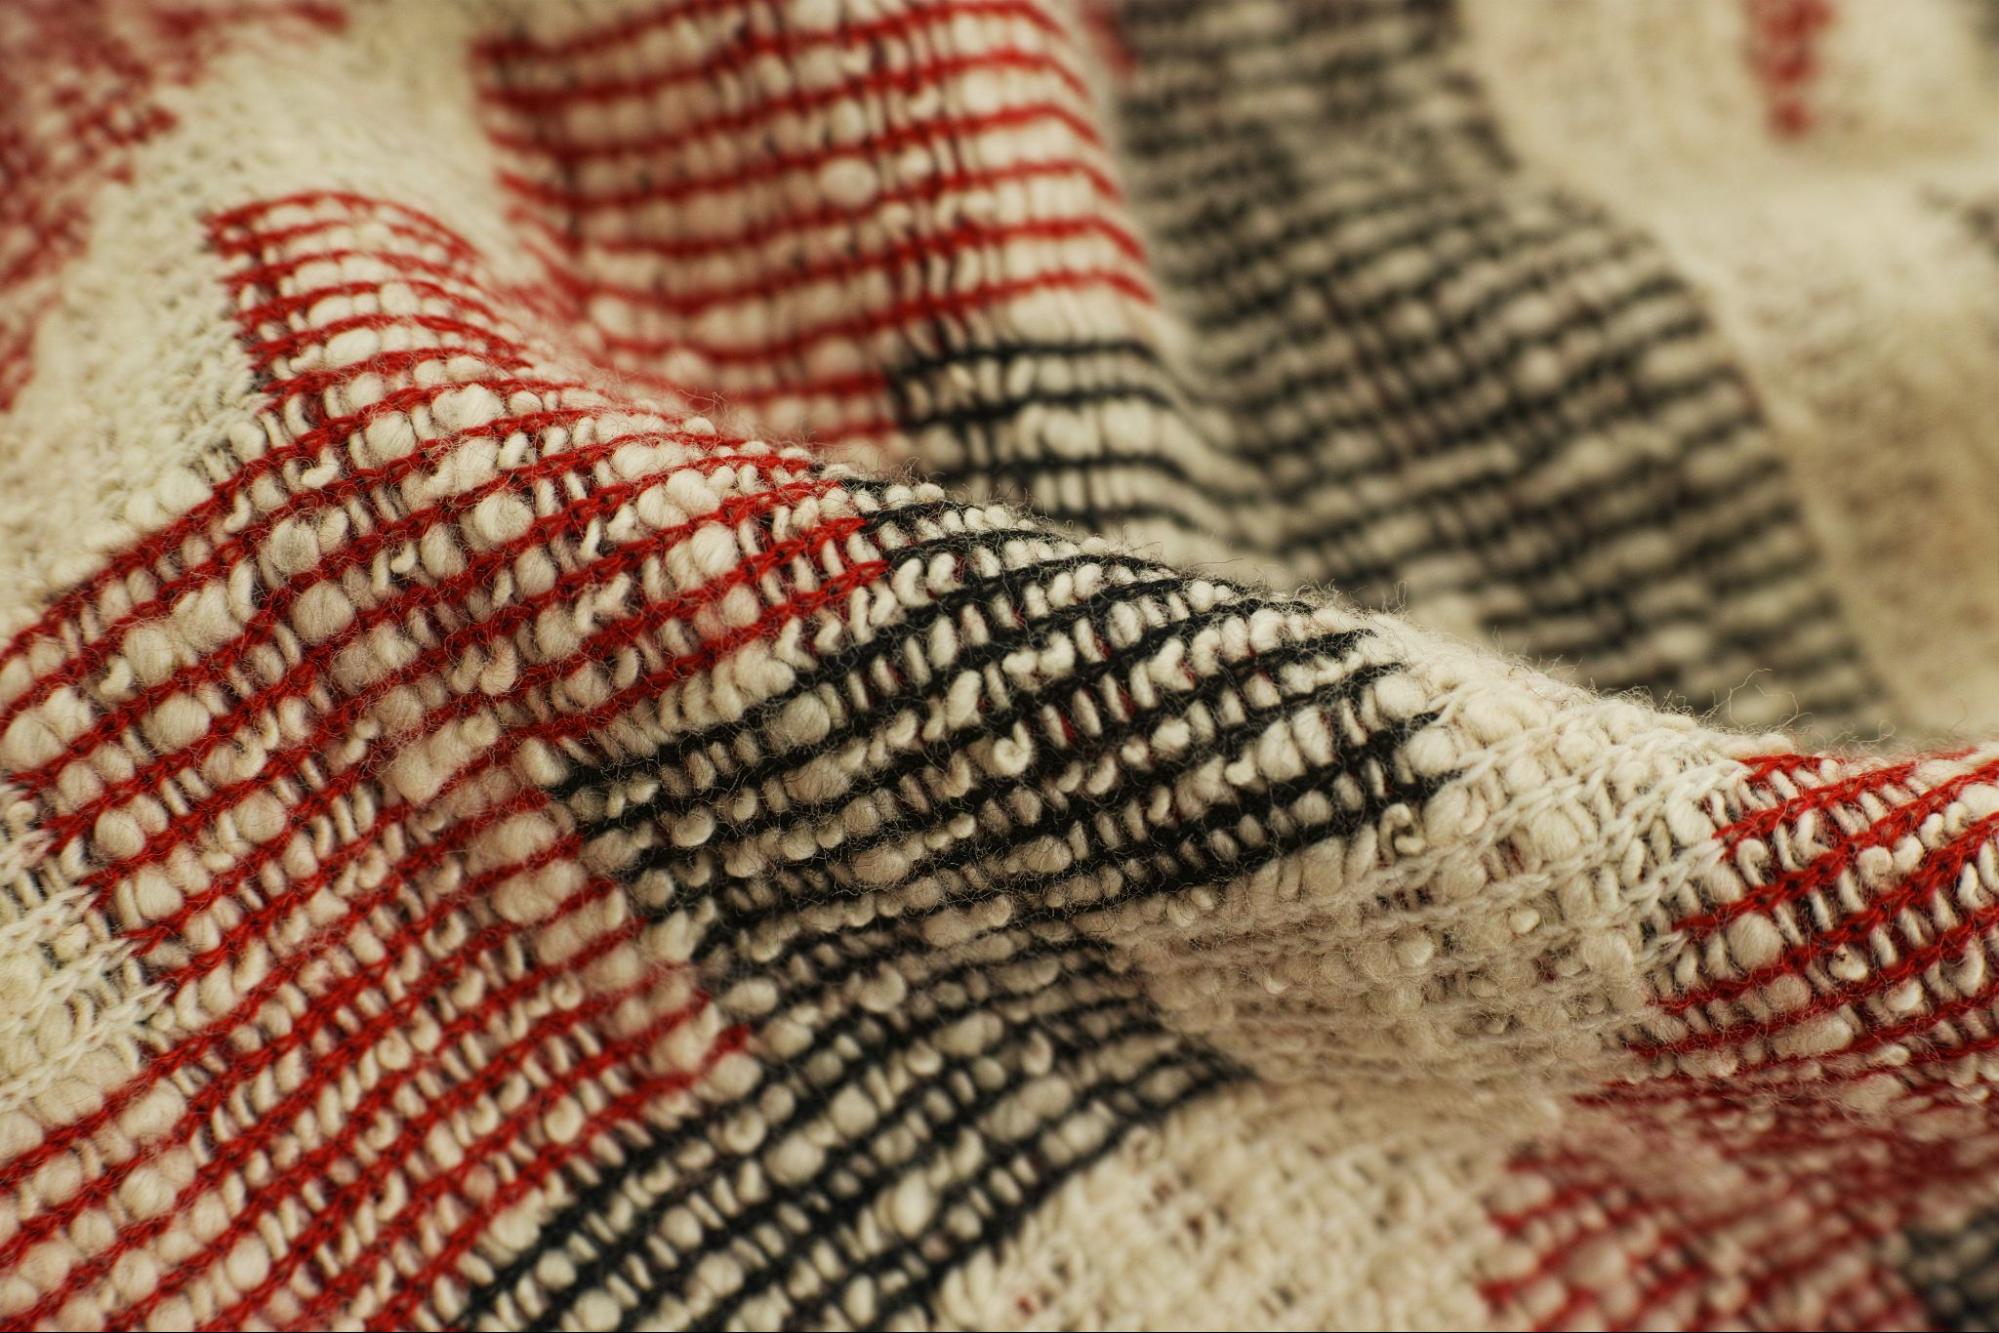 Closeup of natural fibers in a rug that is red, black, and cream colored.